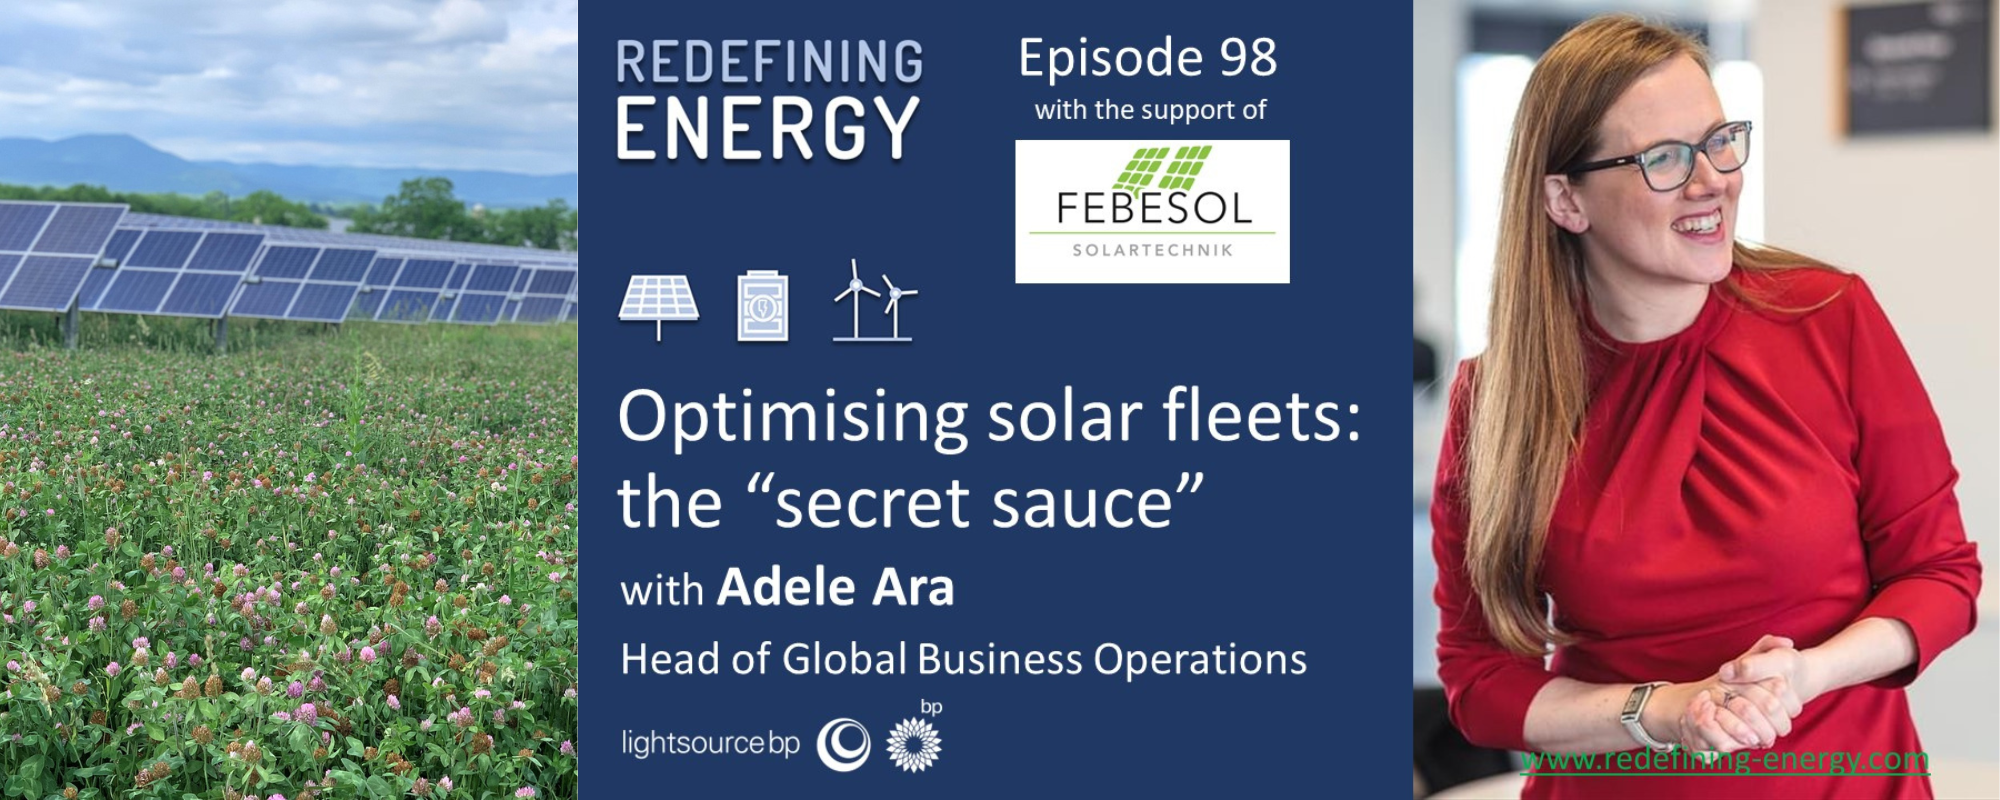 redefining energy podcast title information